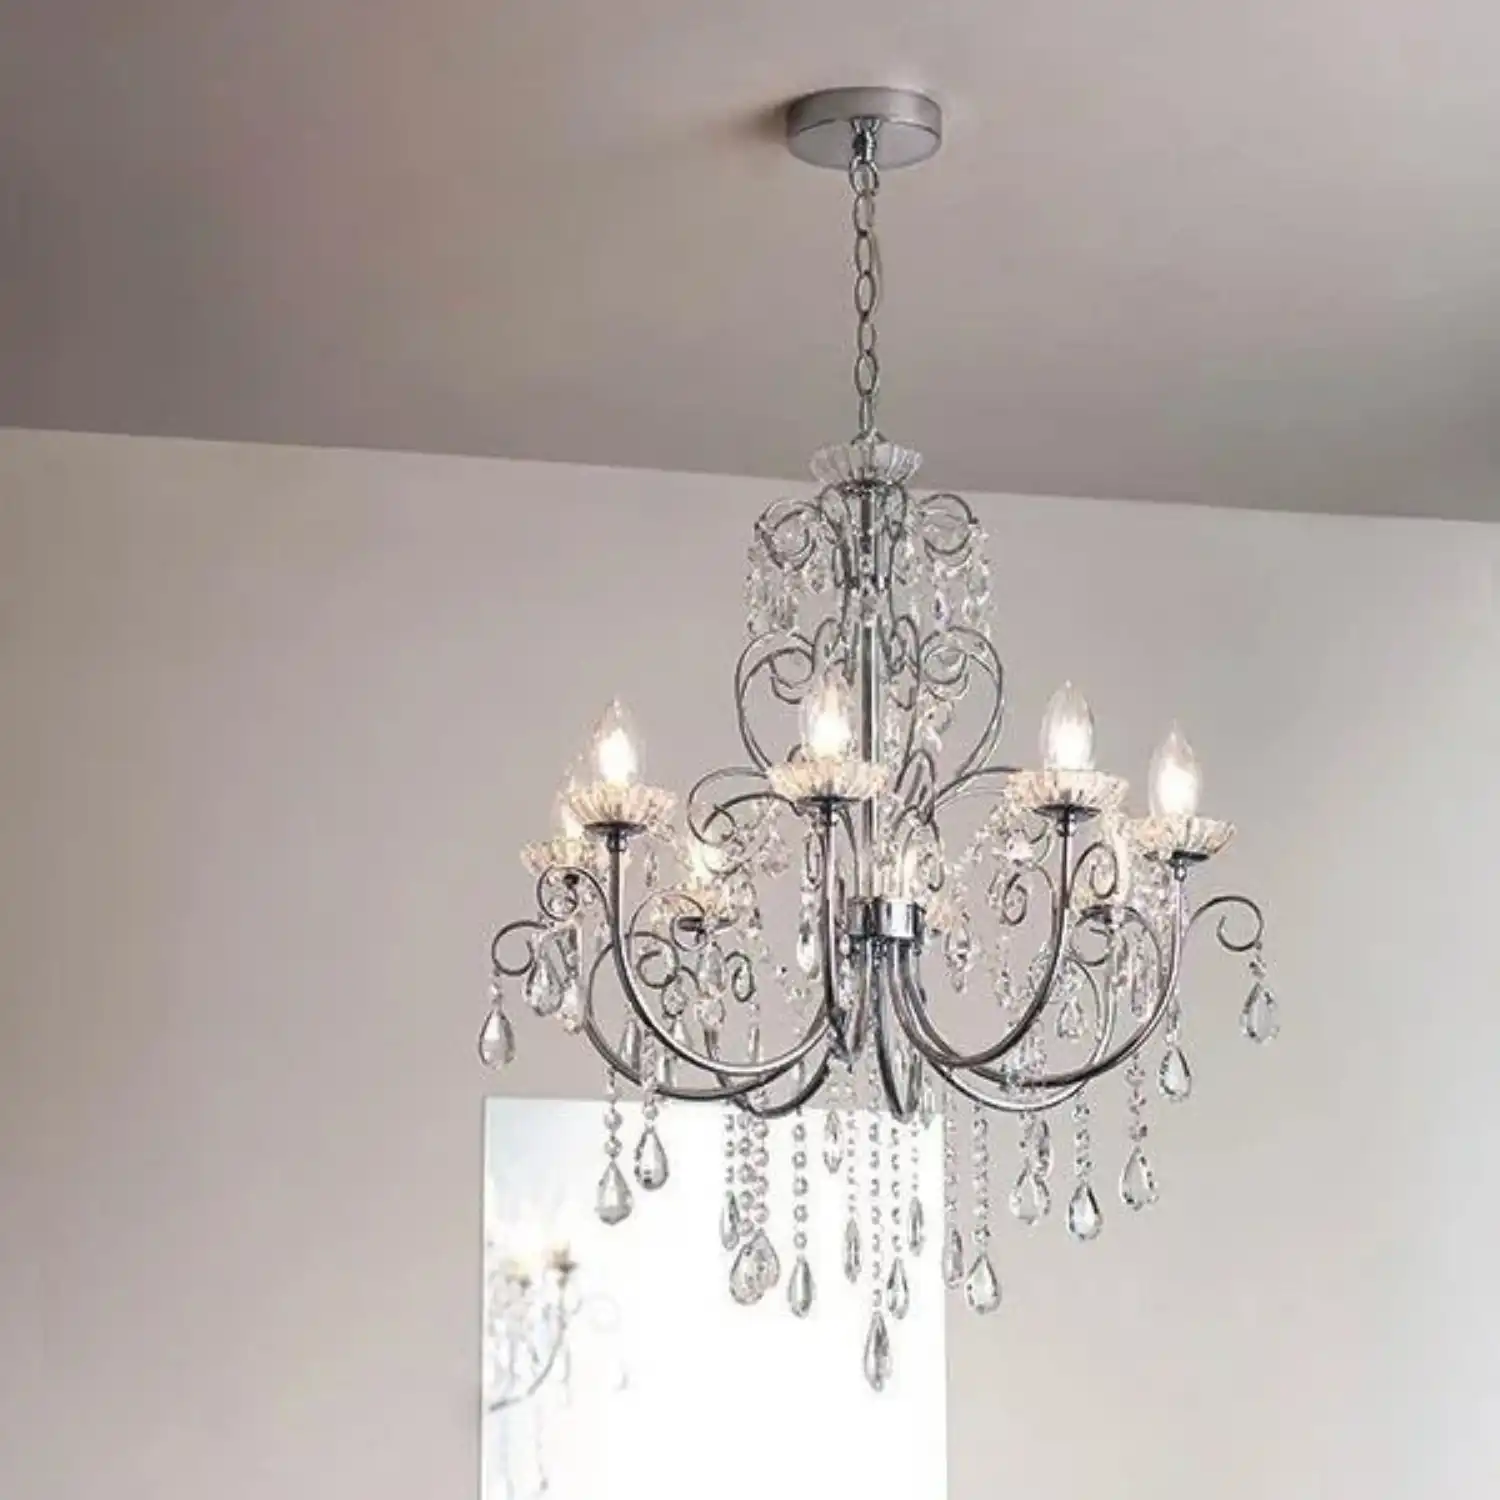 Large Chrome Plated Steel and Crystal Glass 8 Pendant Light Chandelier